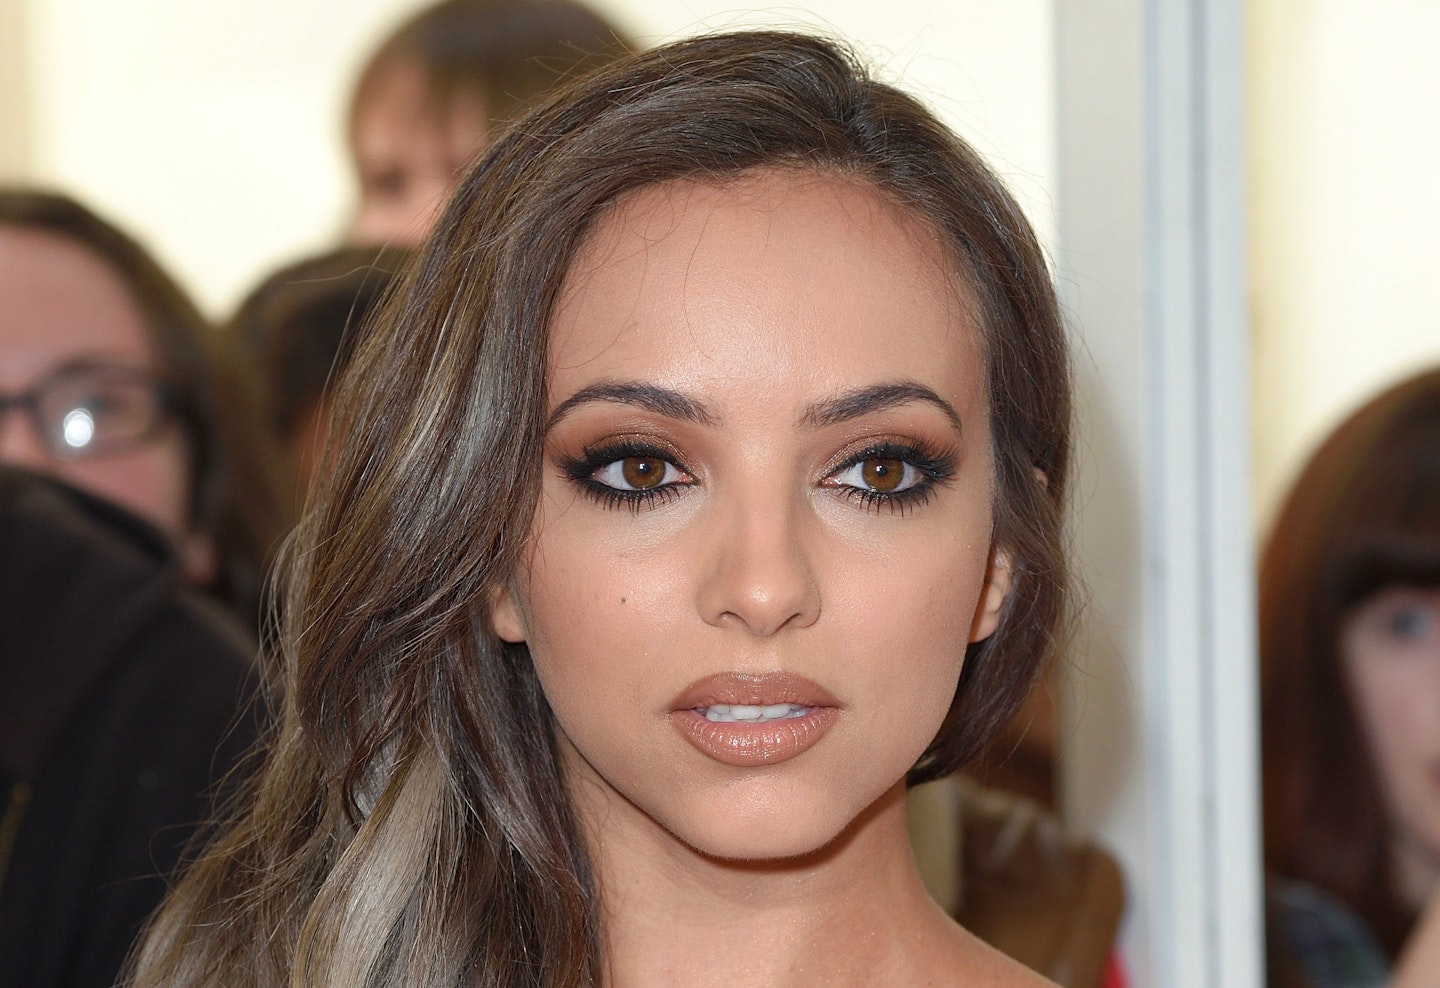 jade thirlwall little mix